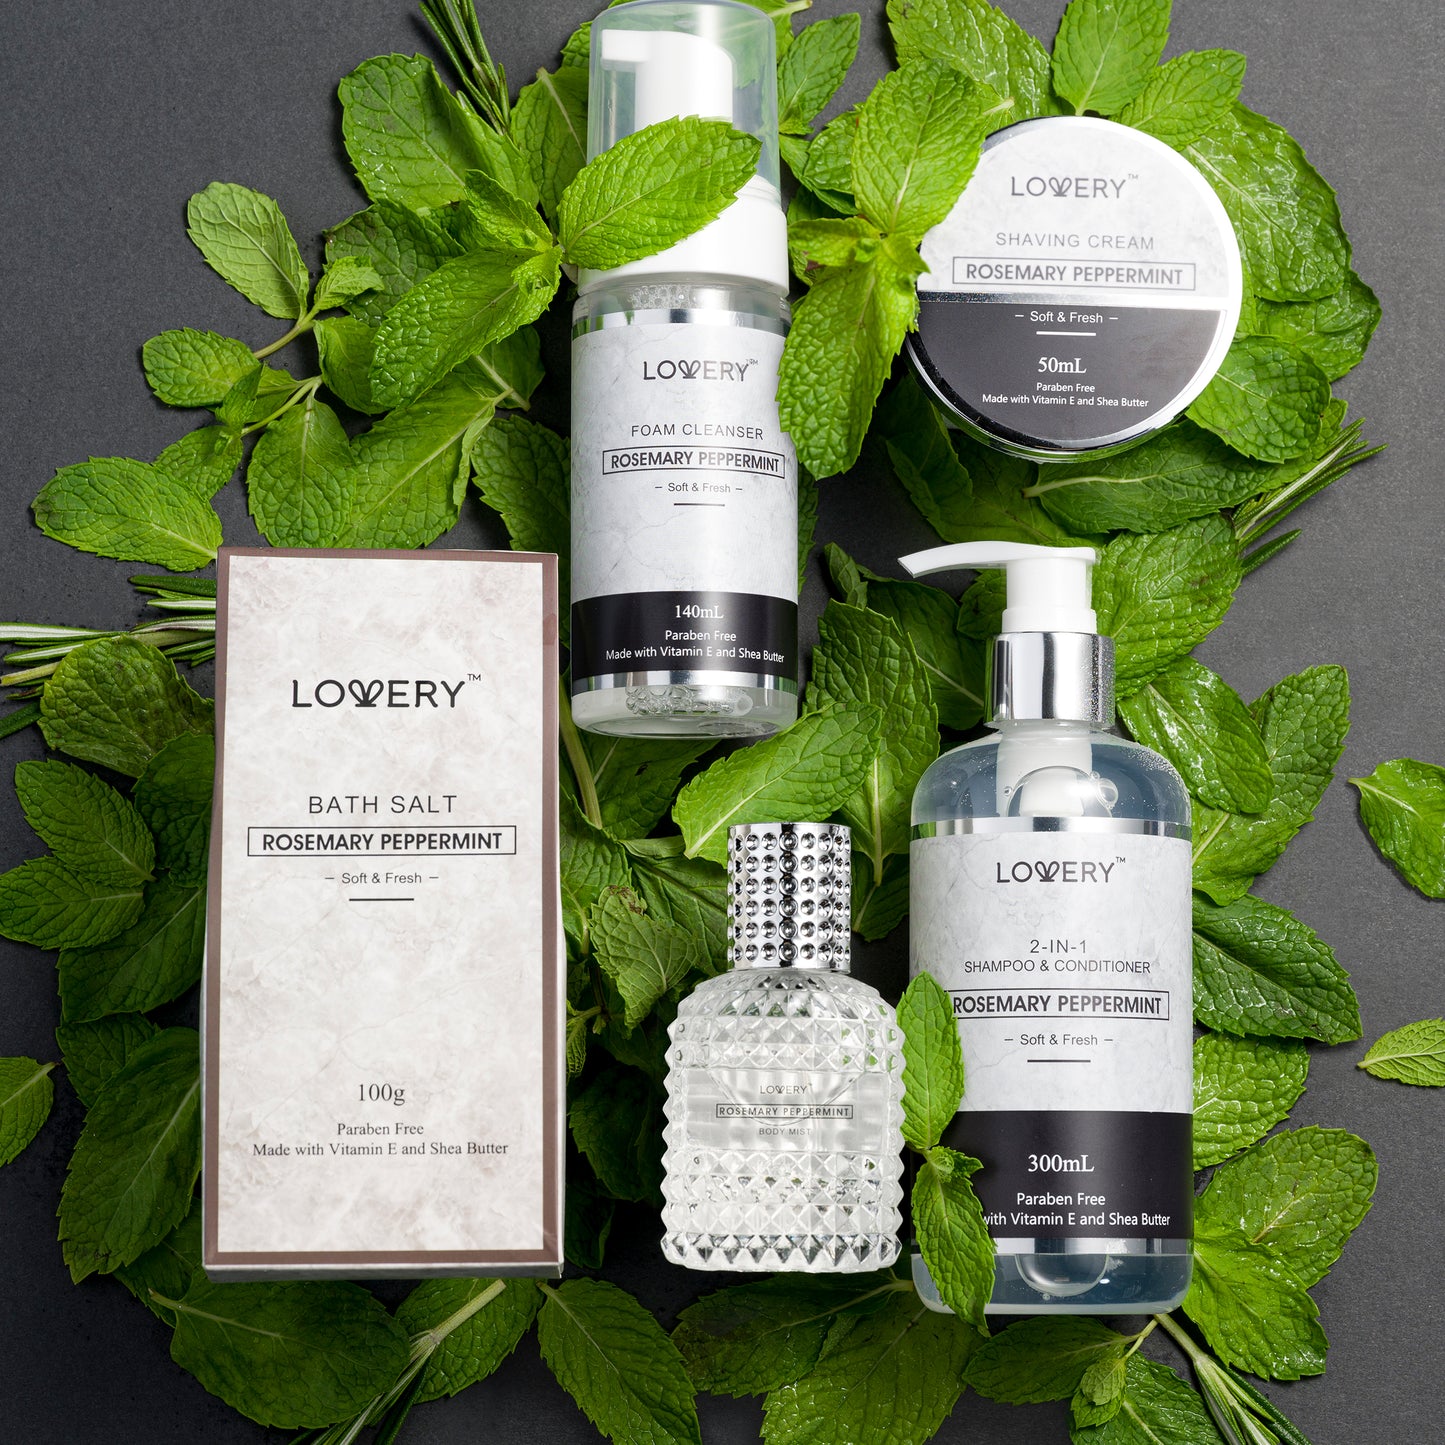 relaxing gift set, lovery gift set, lovery relaxing gift set, rosemary peppermint gift set, rosemary gift, peppermint beauty gift set, rosemary body lotion, peppermint bubble bath, lovery gift baskets, lovery gift box, lovery